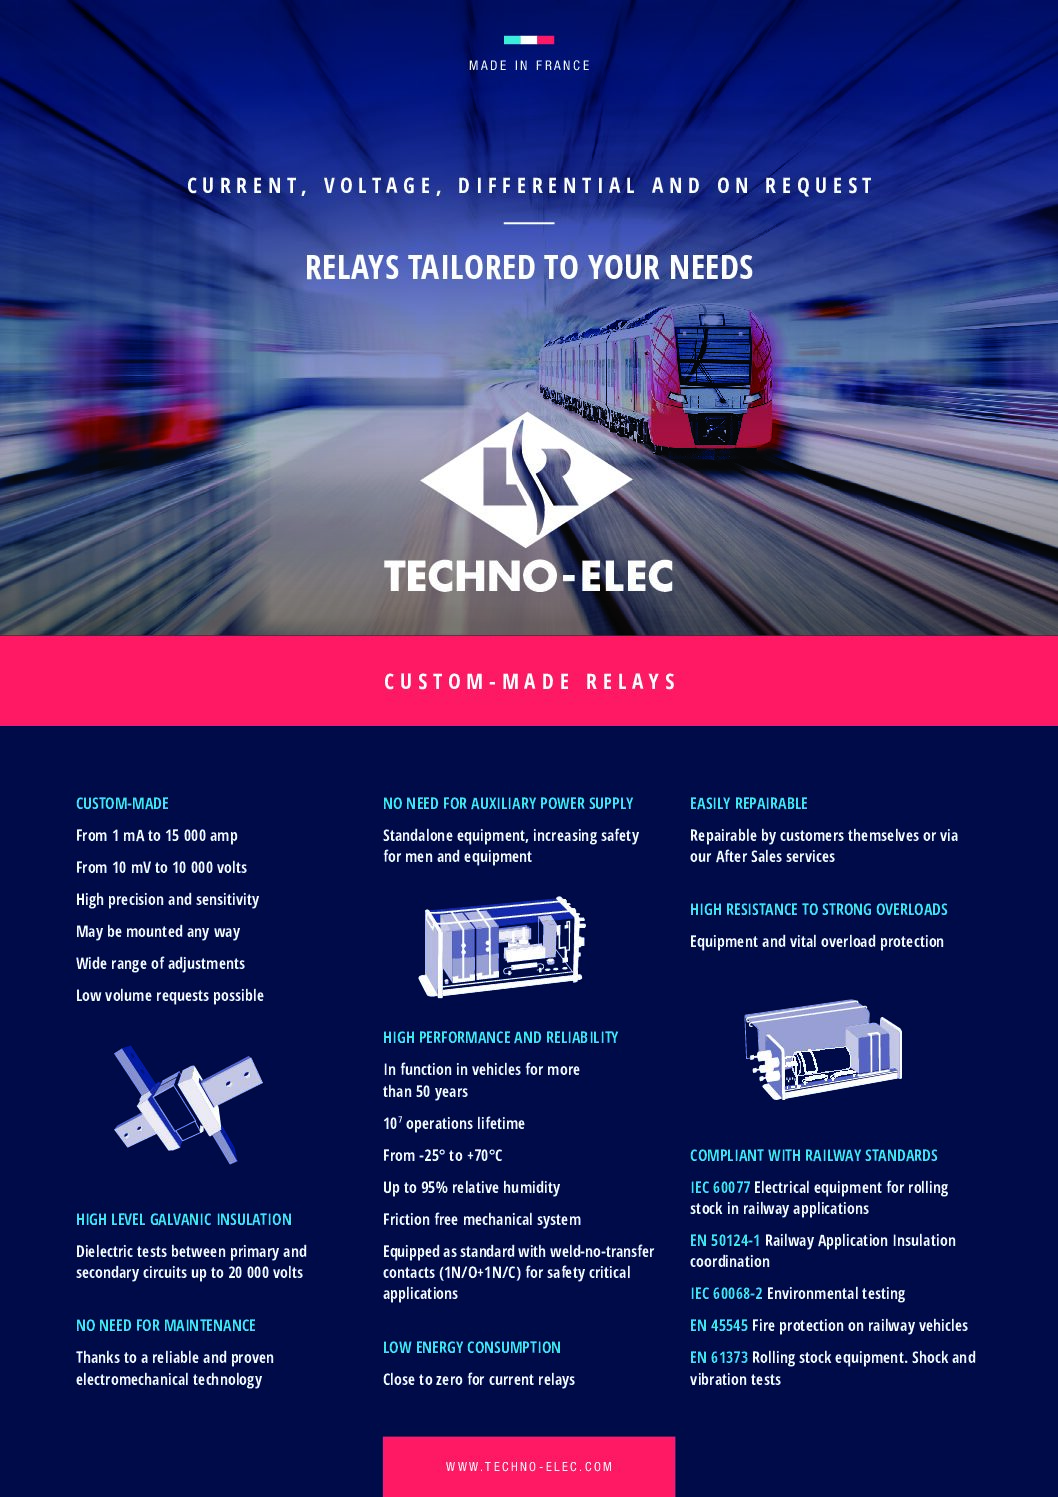 TECHNO-ELEC: Relays Tailored to Your Needs